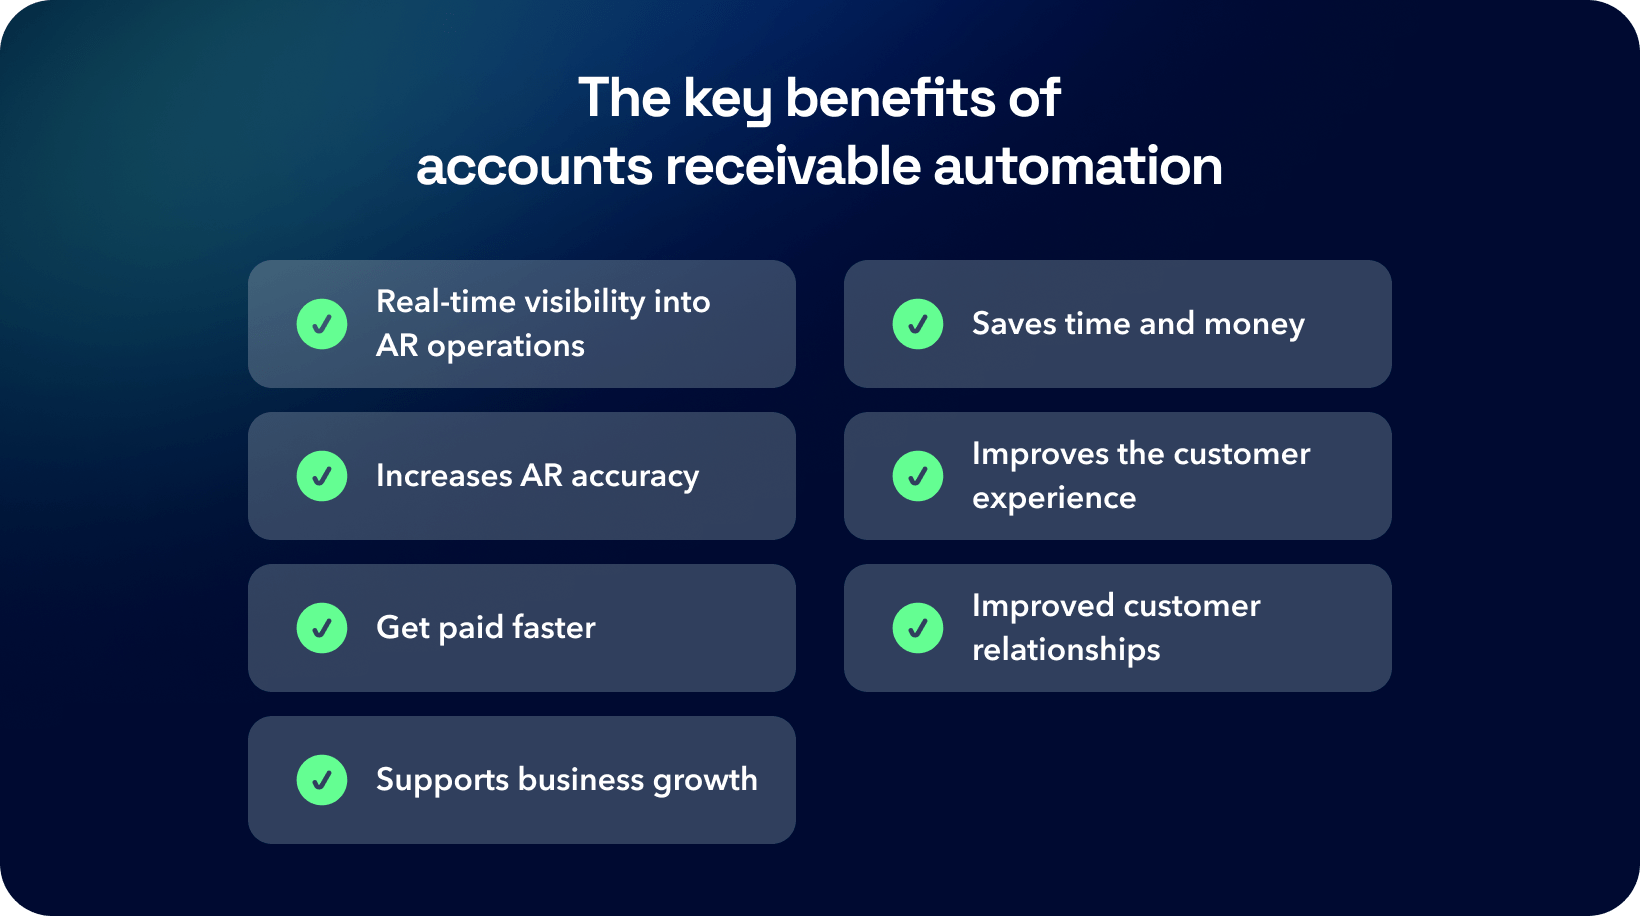 Key benefits of AR automation: Real-time visibility, increased accuracy, get paid faster, supports growth, saves time & money, improves CX